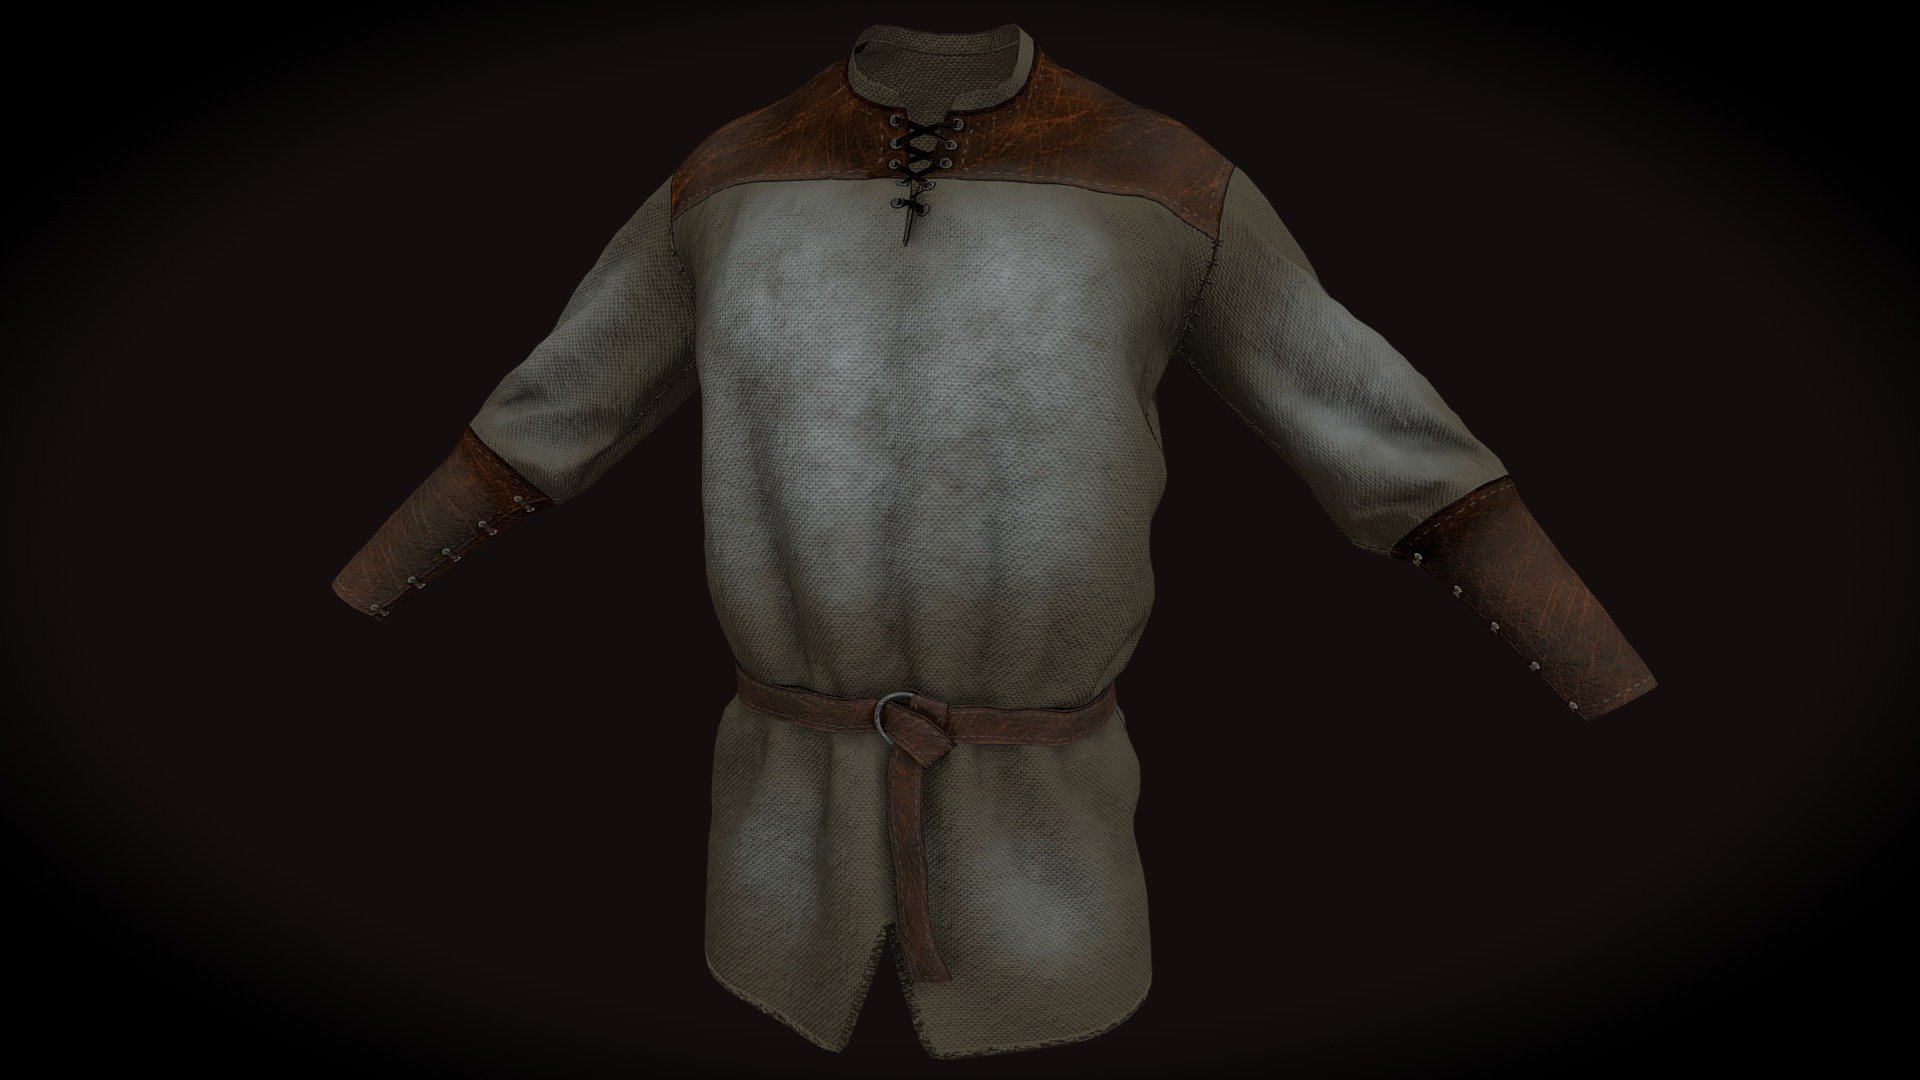 Created in Marevelous Designer and Painted in Substance Painter
Mesh count is a bit high due to the lace rings on the chest 3d model